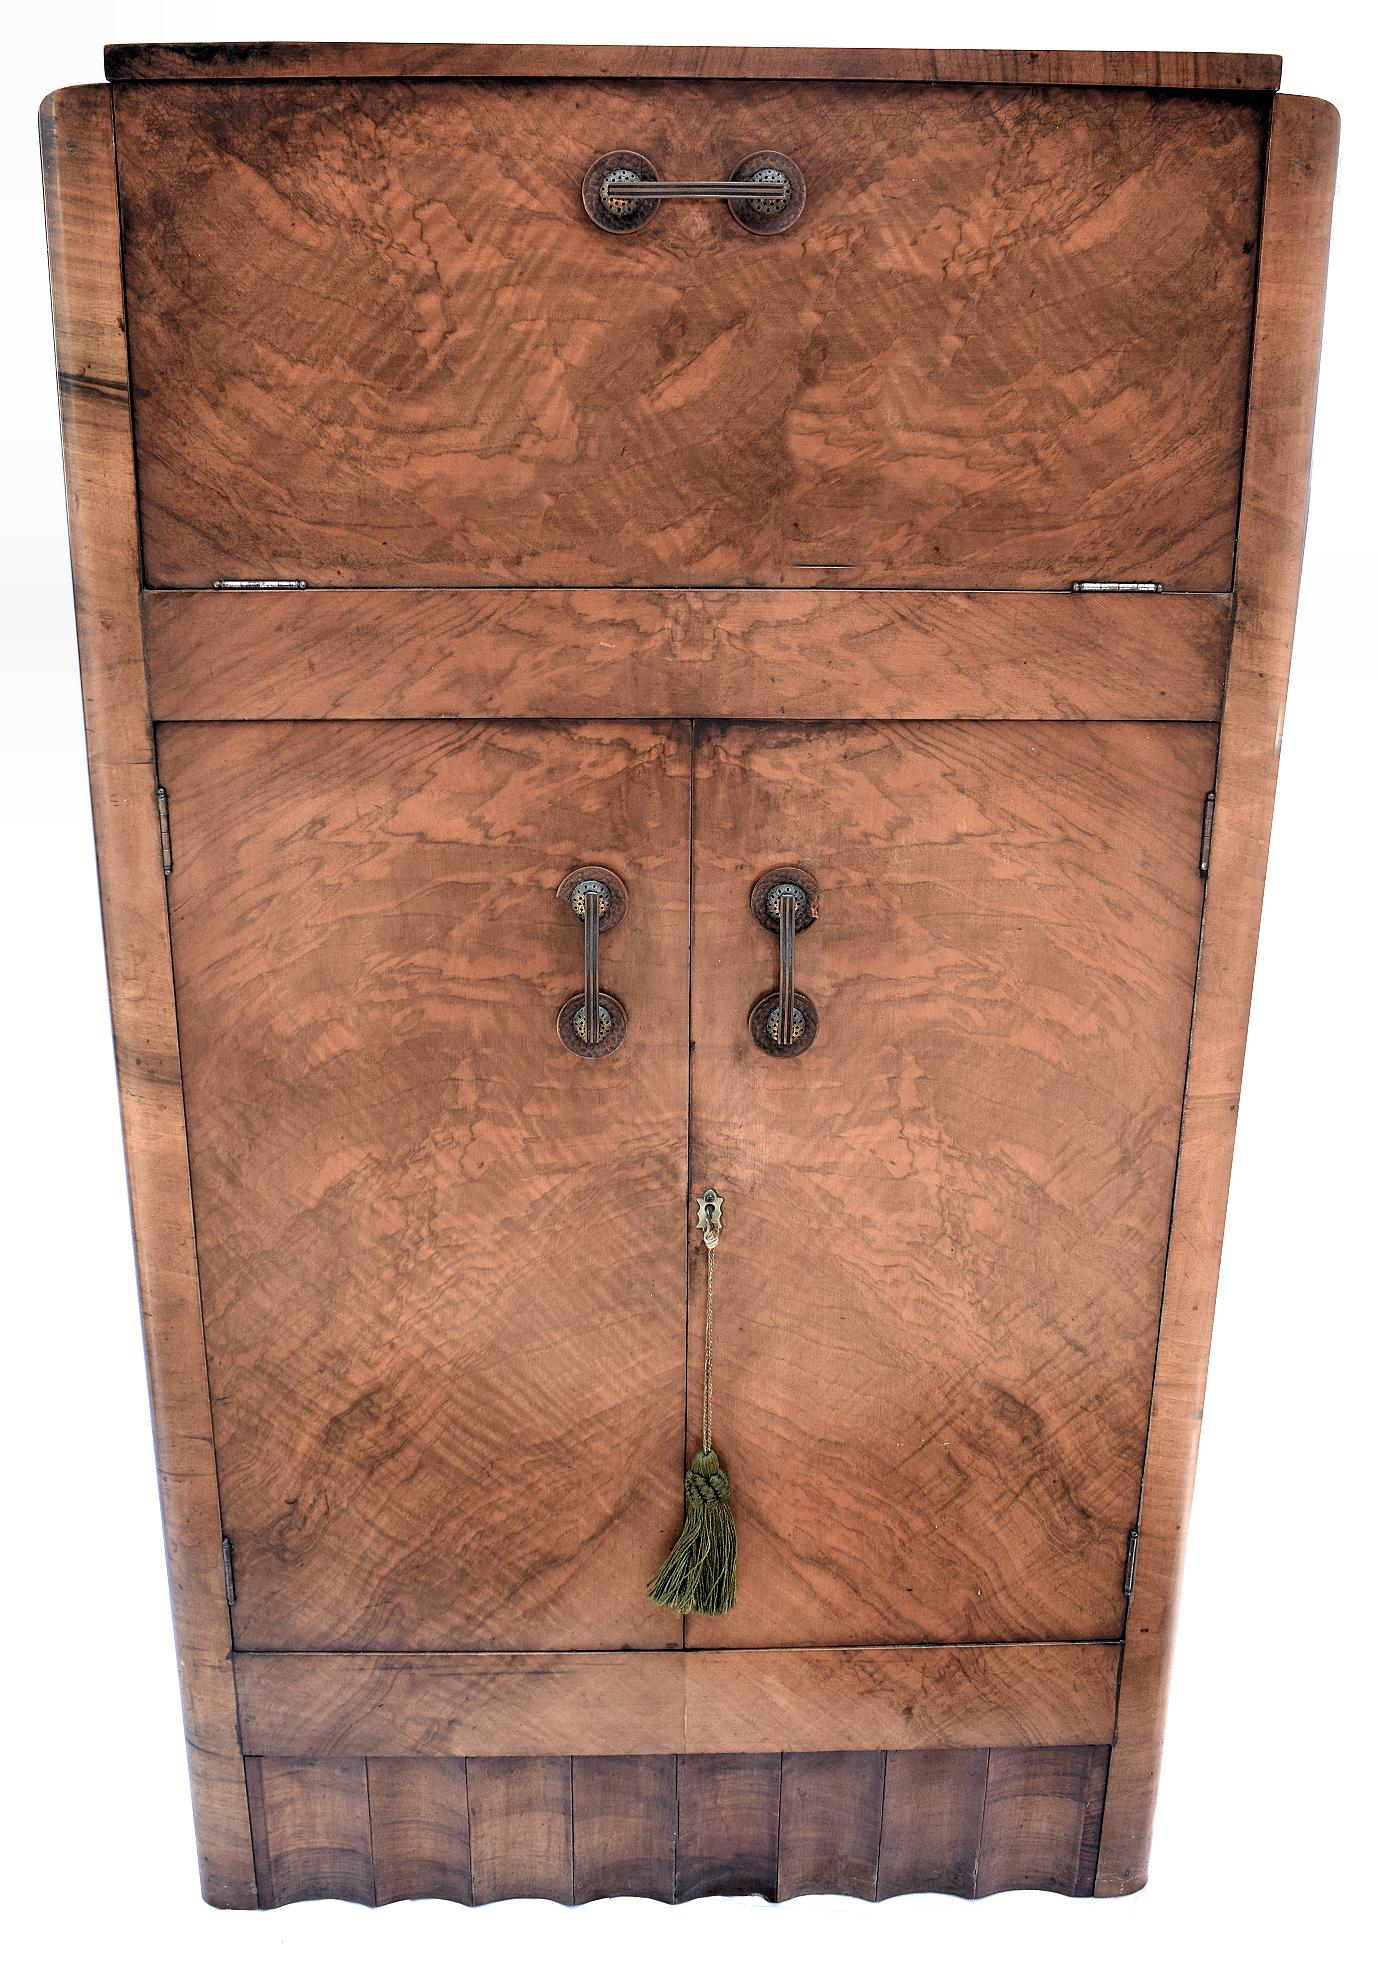 Art Deco fitted burr walnut cocktail cabinet.

This hugely stylish cocktail cabinet hospitality cabinet, is a fantastic piece of Art Deco furniture, and it's internal features prove to be an incredibly appealing feature.
The beautifully presented